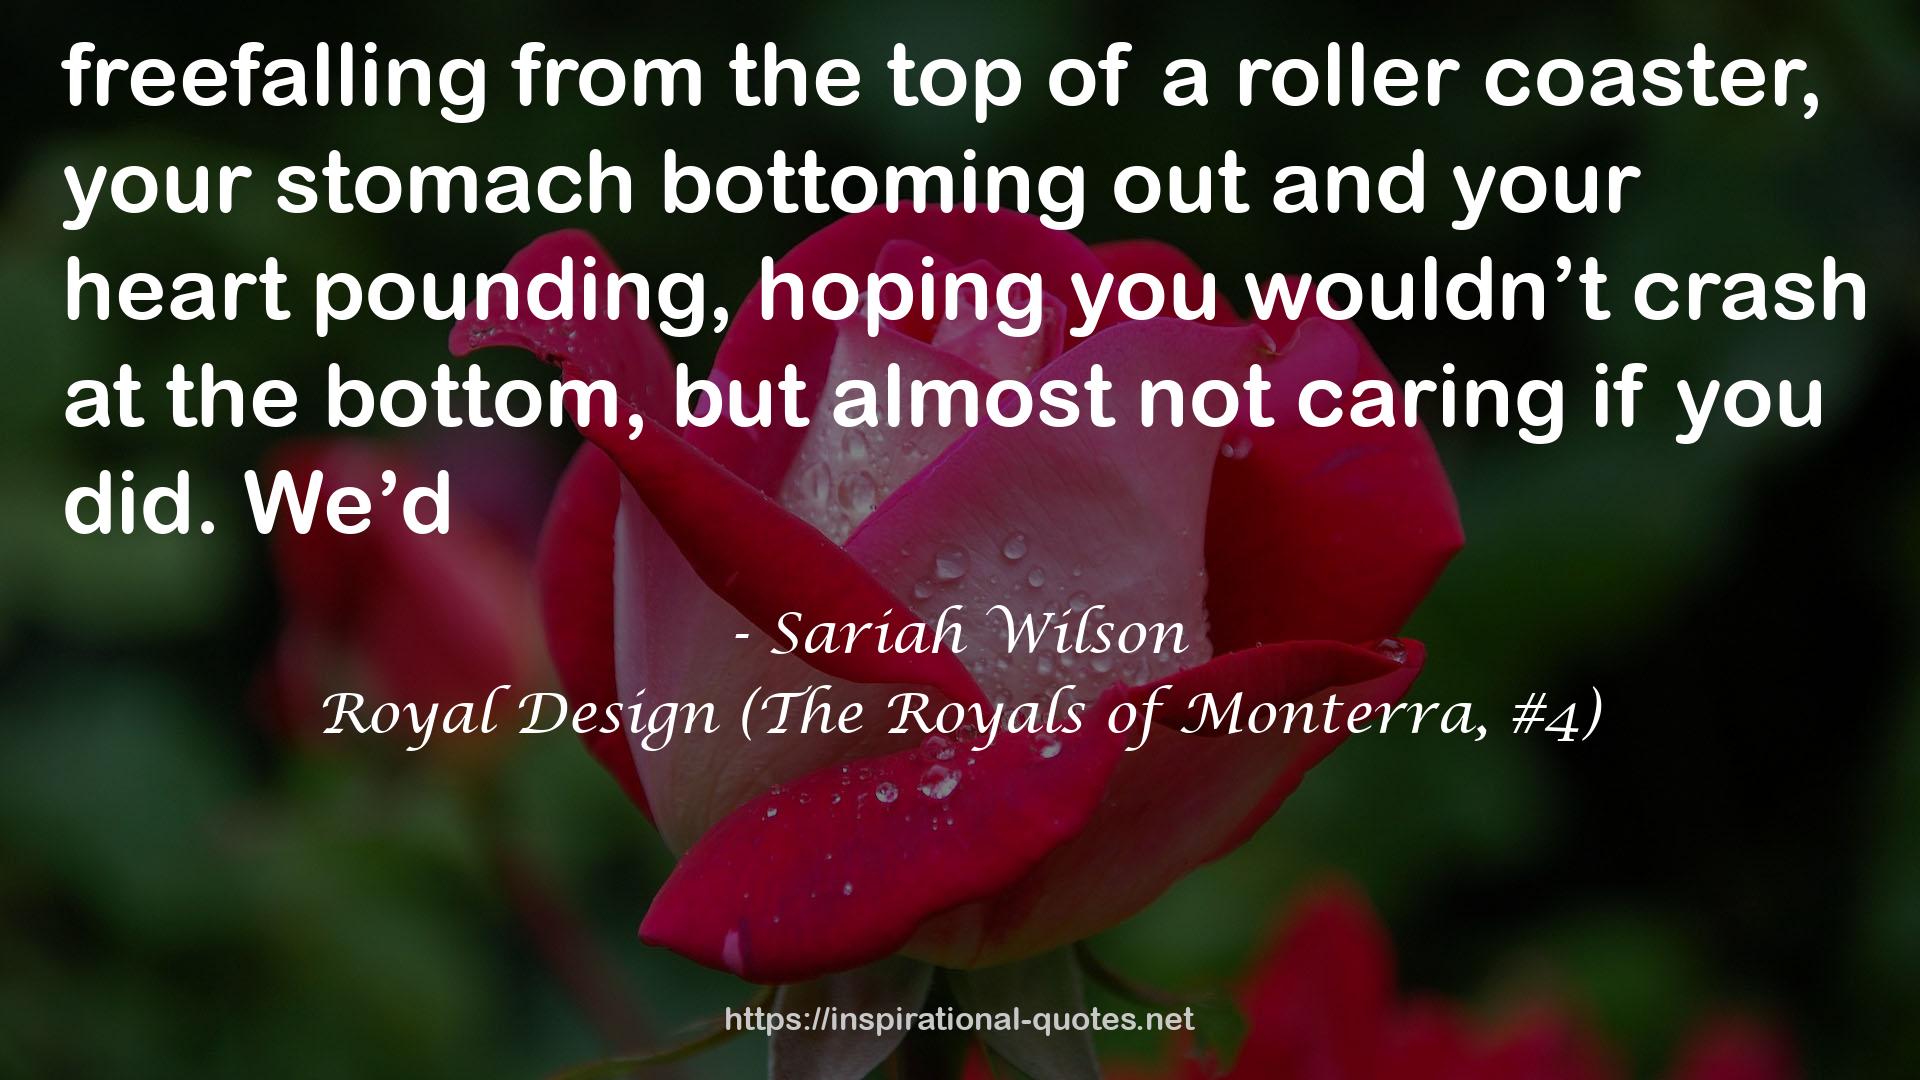 Royal Design (The Royals of Monterra, #4) QUOTES